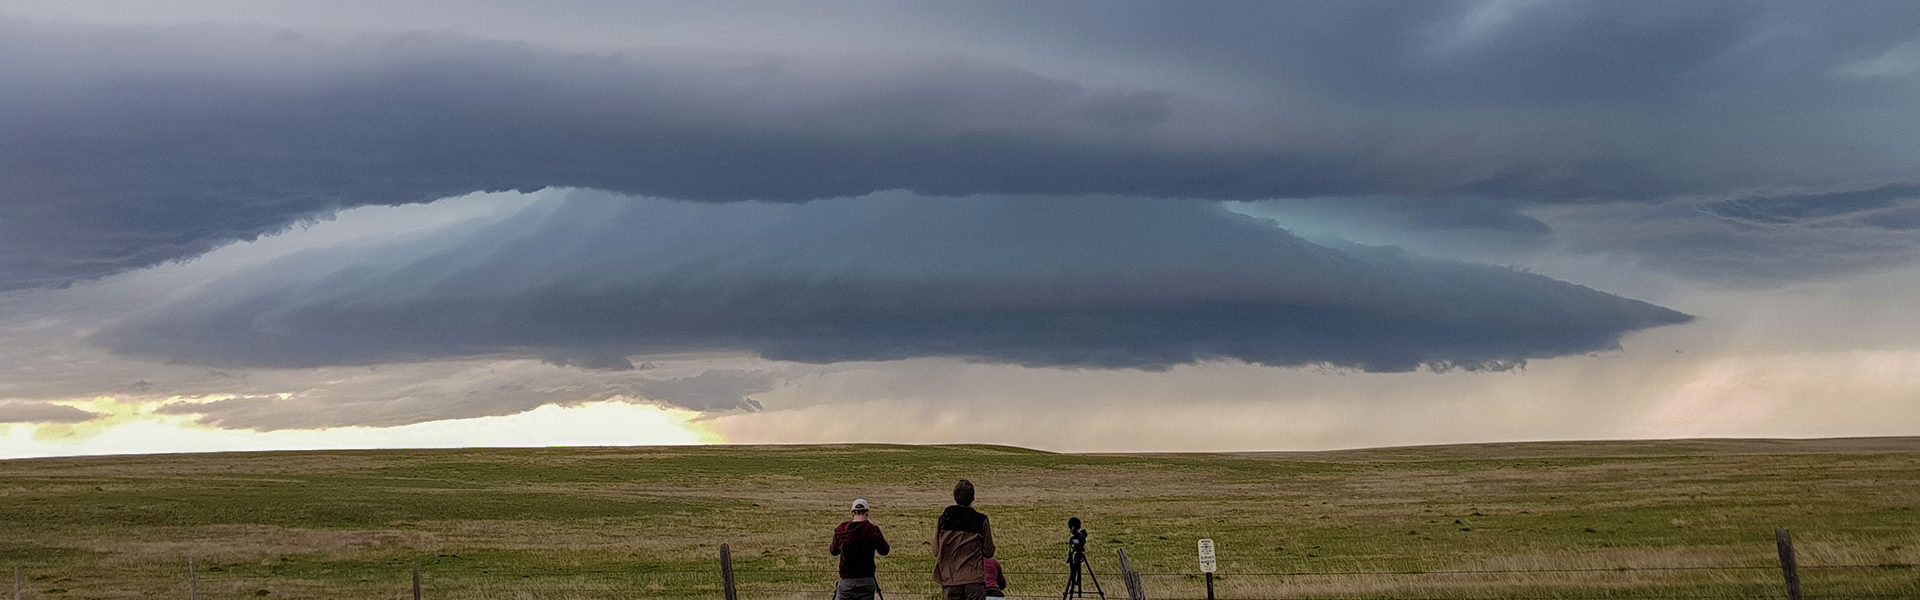 See Nature's Fury Team in Wyoming with Supercell